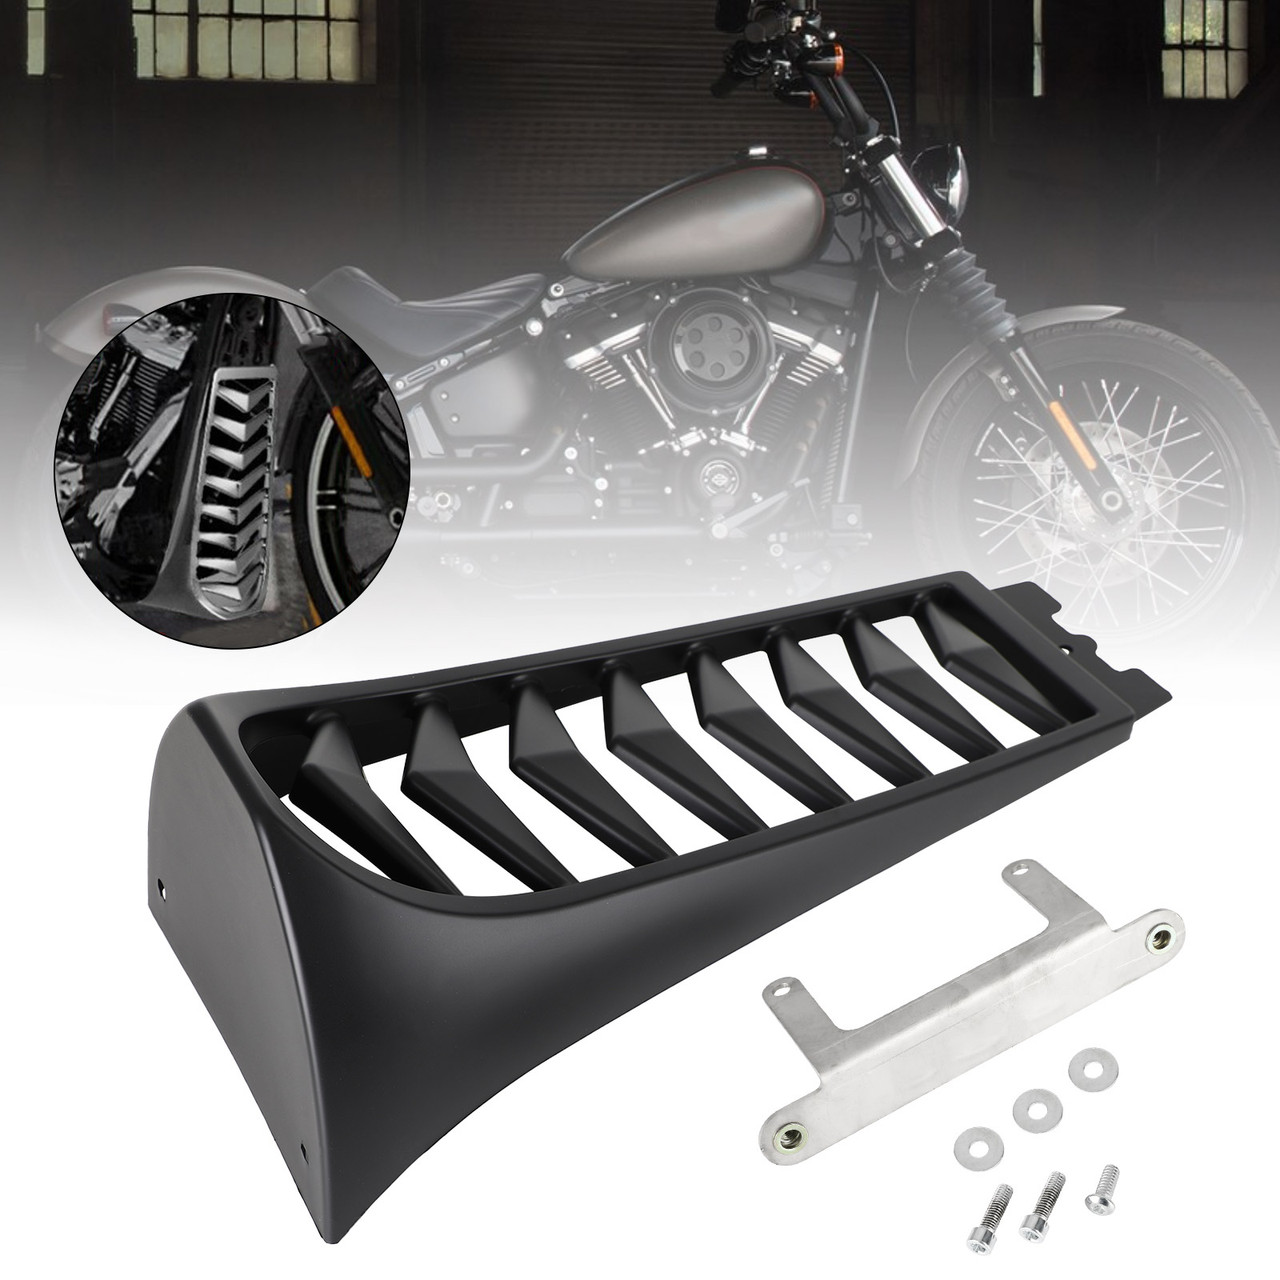 Front Chin Spoiler Lower Radiator Cover Fits for Harley Softail Street Bob Breakout Fat Bob 2018-2022 MBLK